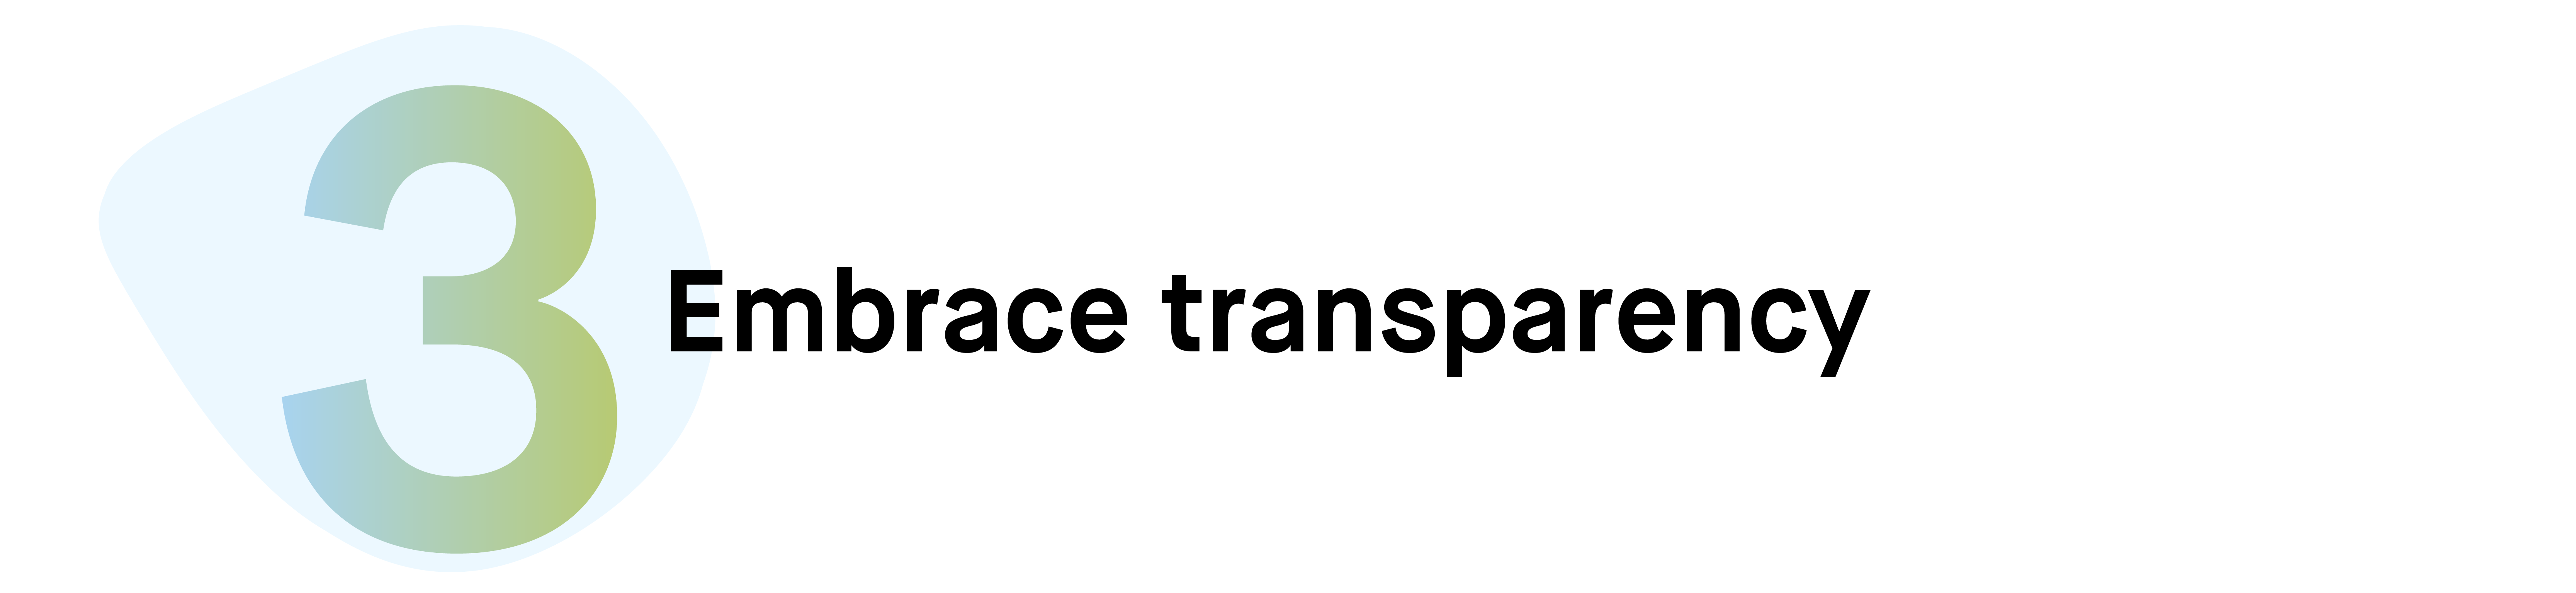 Number 3: Embrace transparency